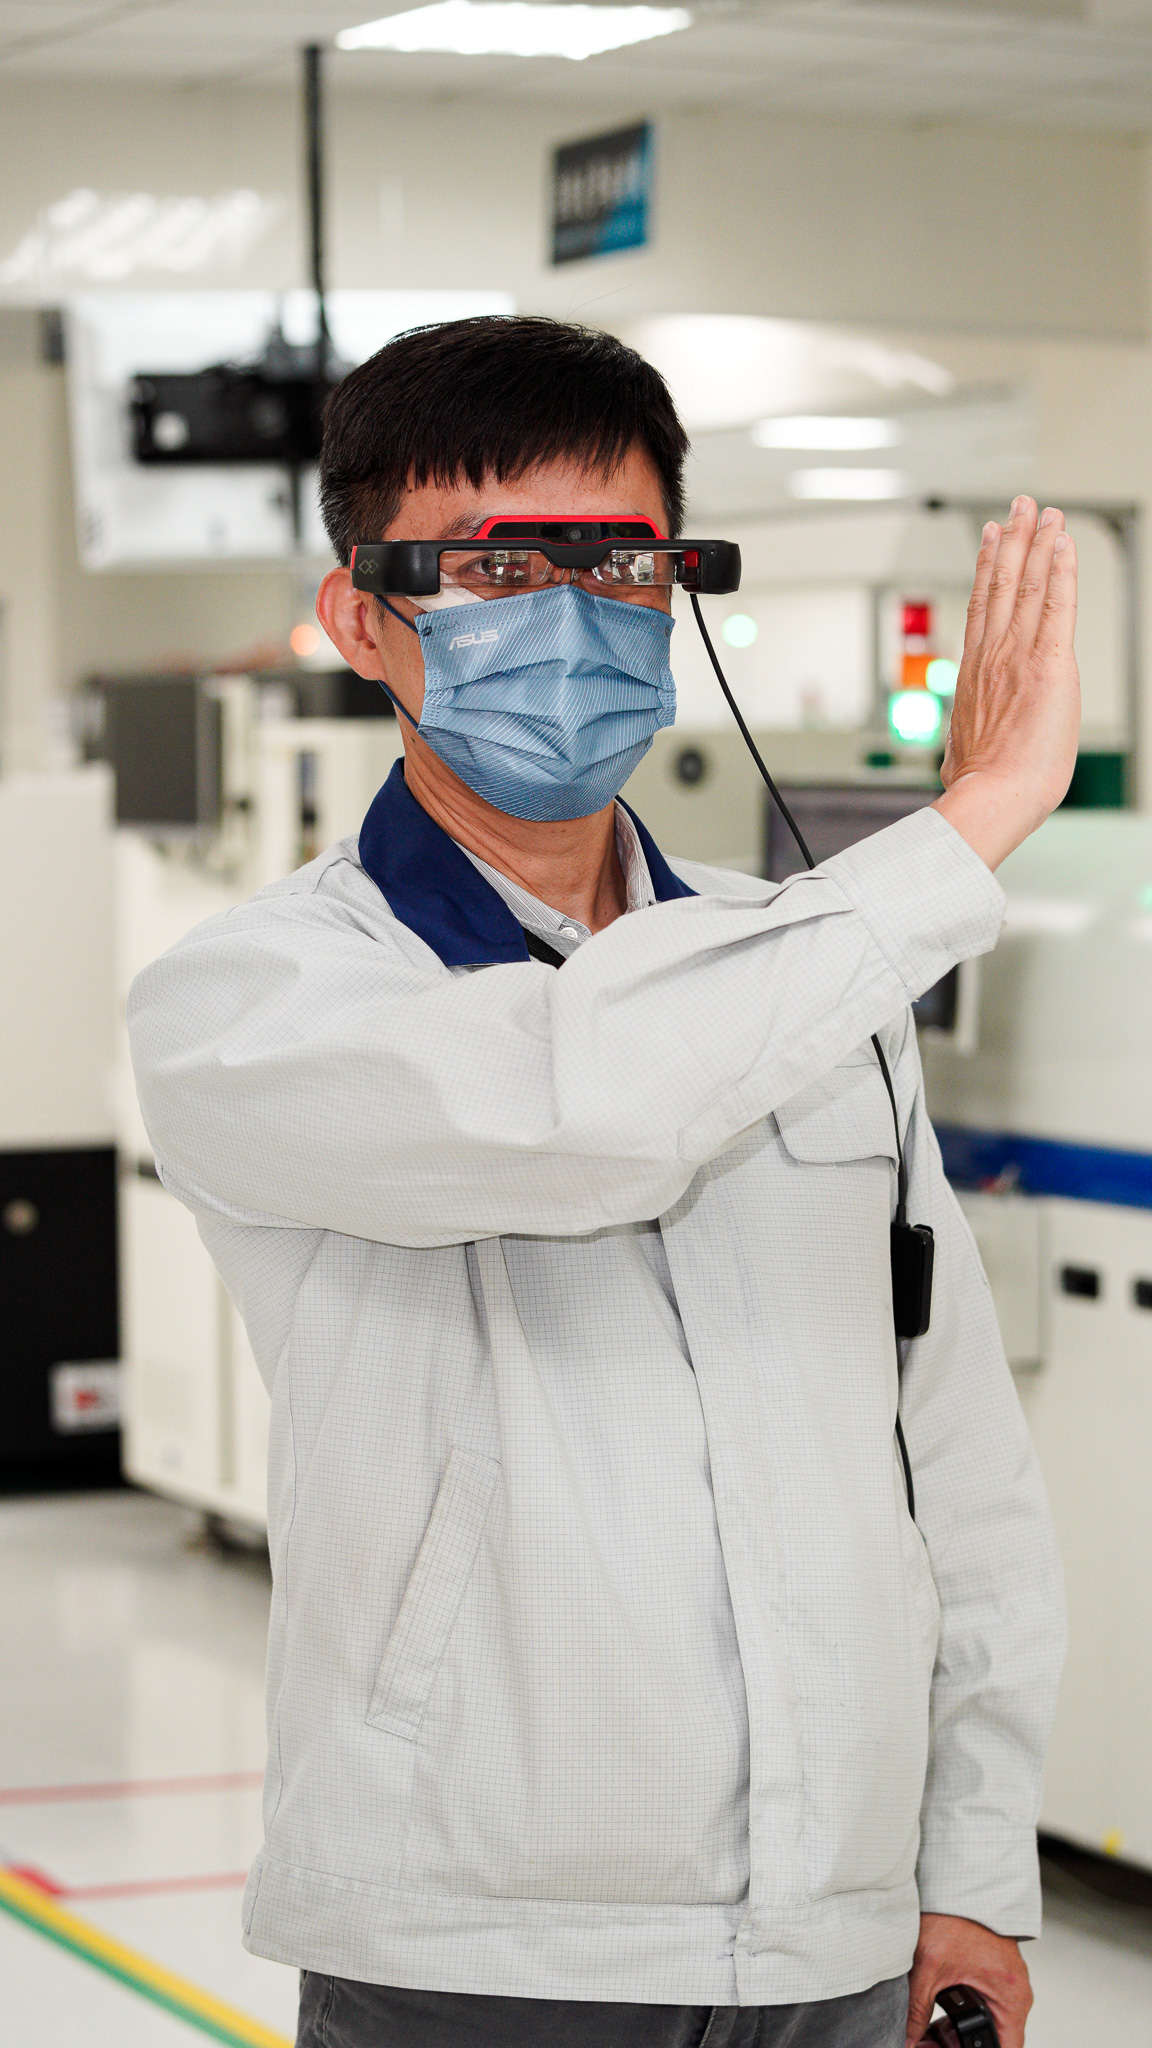 a worker in a factory wearing AR smart glasses and a blue surgical mask. The individual is engaged in an interaction machine using his hand